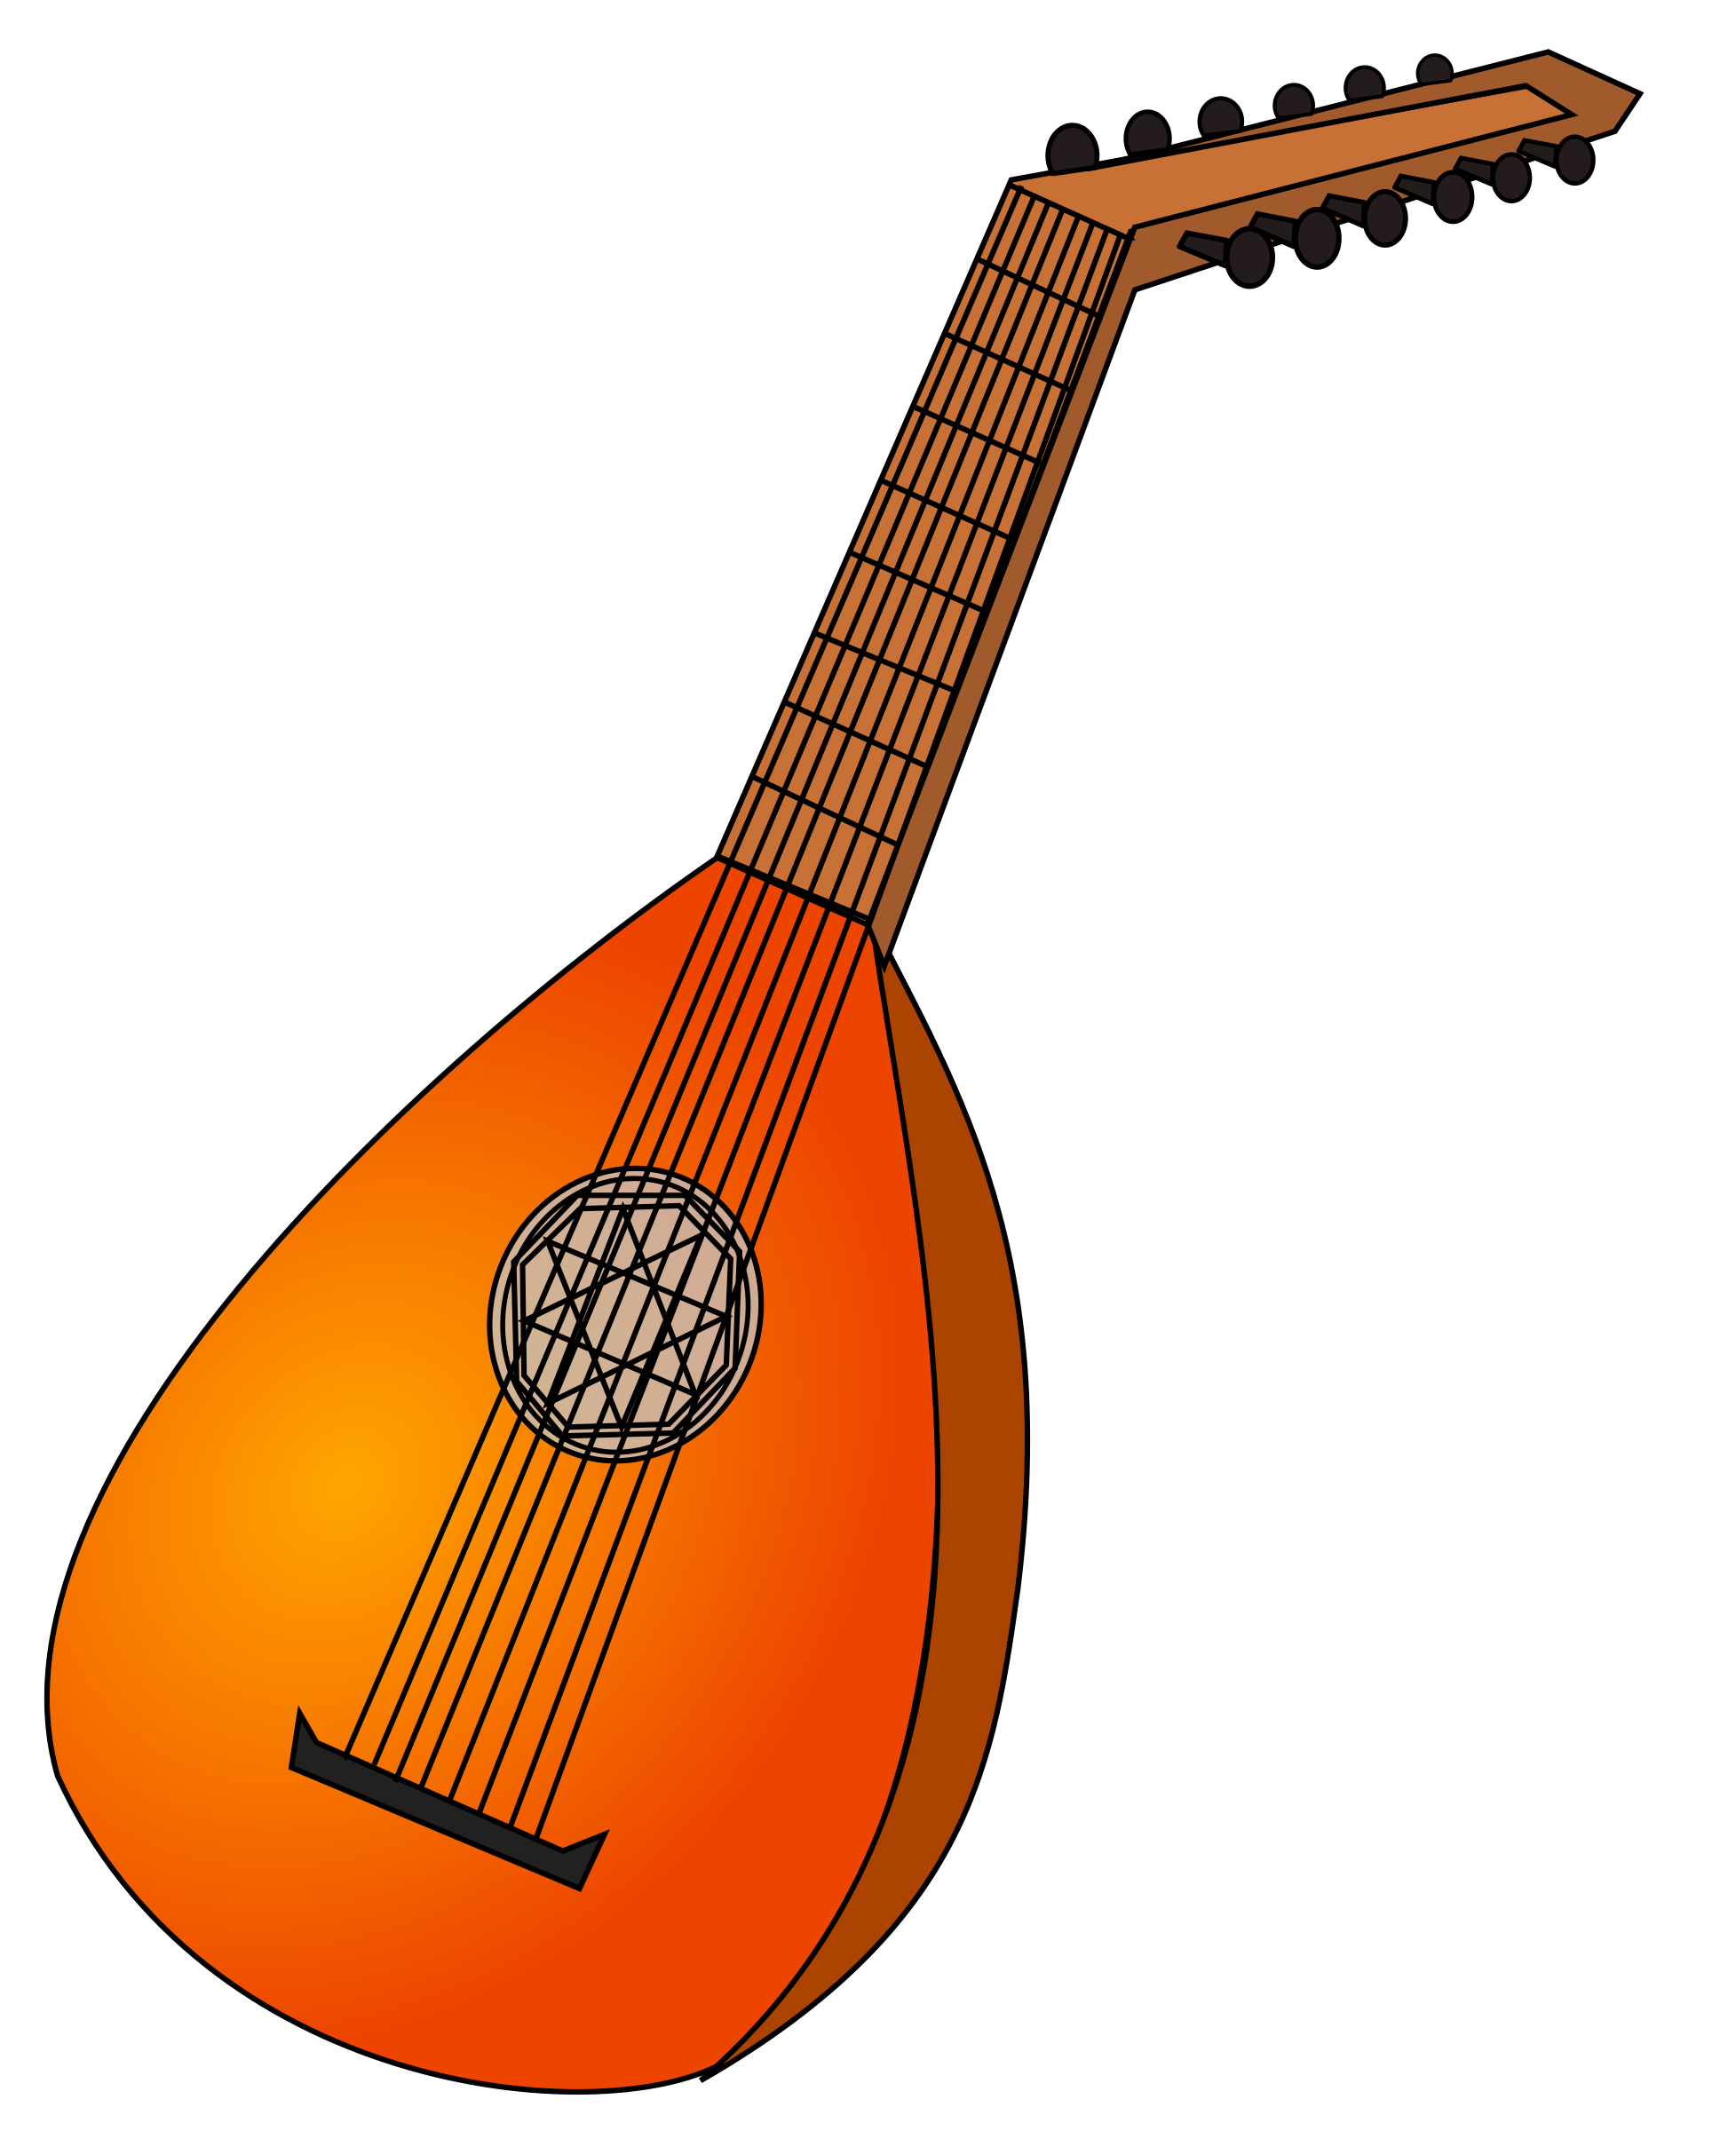 instruments clipart medieval